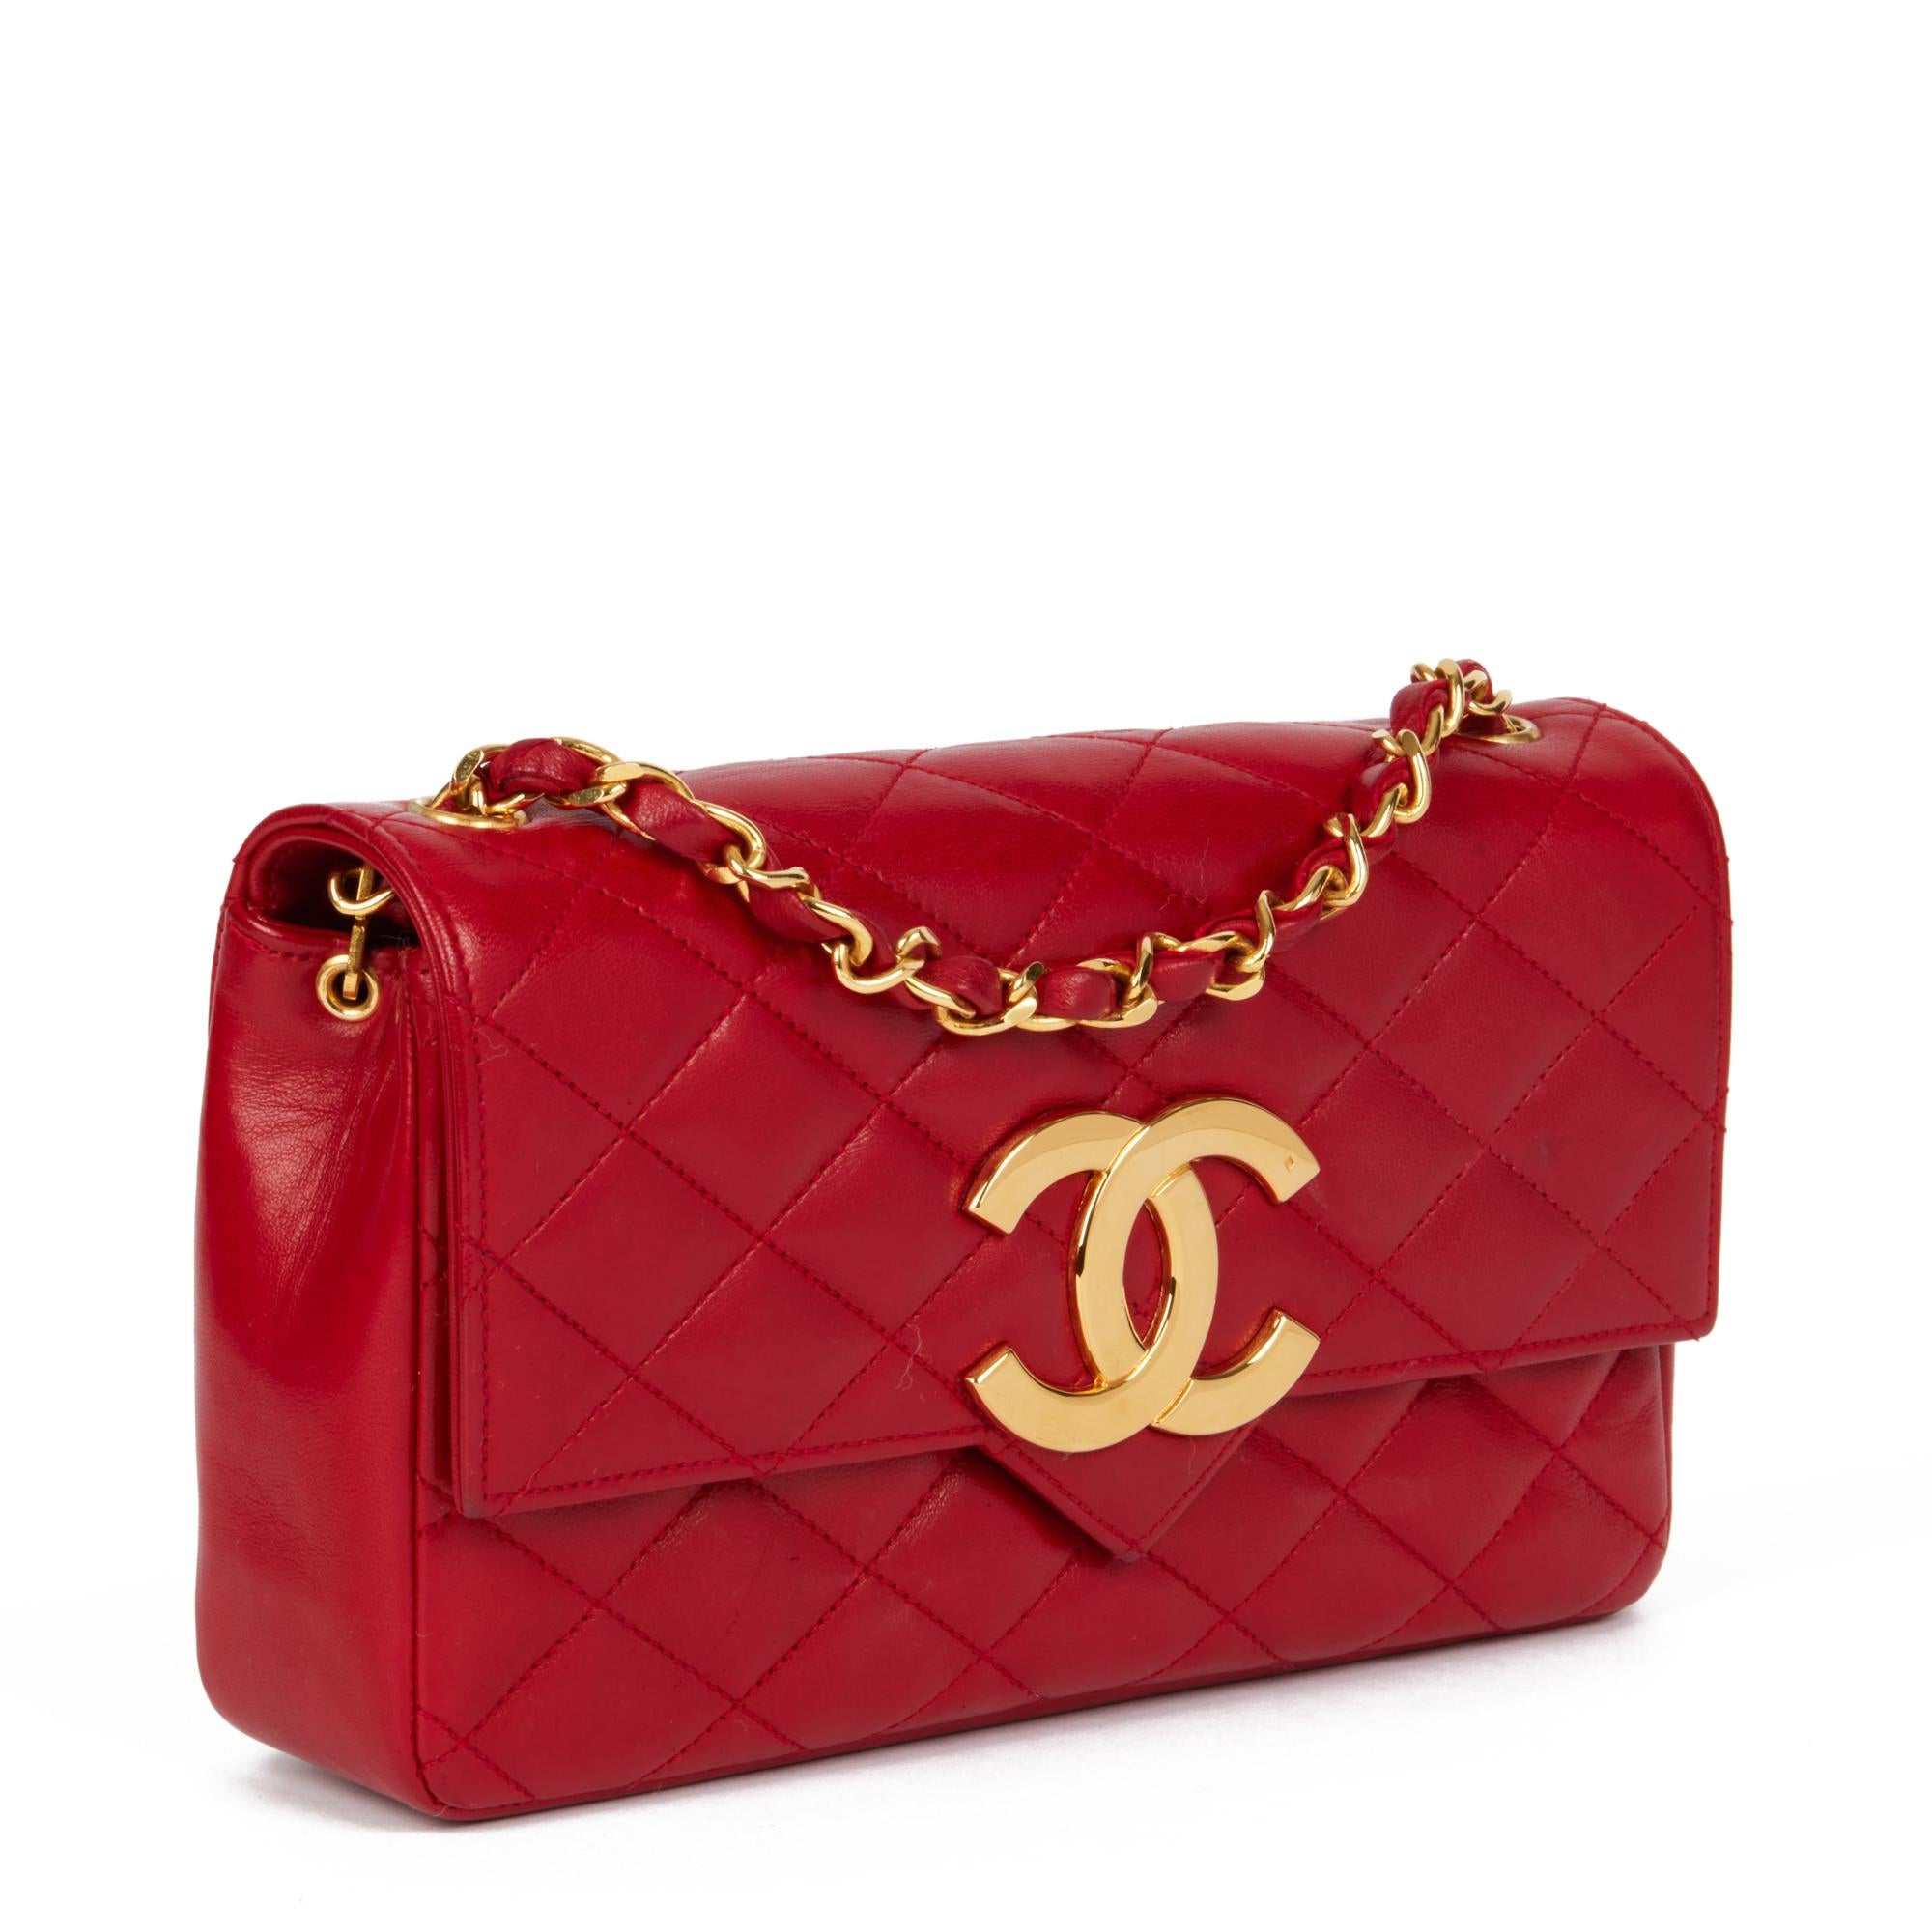 CHANEL
Red Quilted Lambskin Vintage XL Small Classic Single Flap Bag

Xupes Reference: HB4527
Serial Number: 0609122
Age (Circa): 1988
Accompanied By: Chanel Dust Bag, Box, Authenticity Card
Authenticity Details: Authenticity Card, Serial Sticker